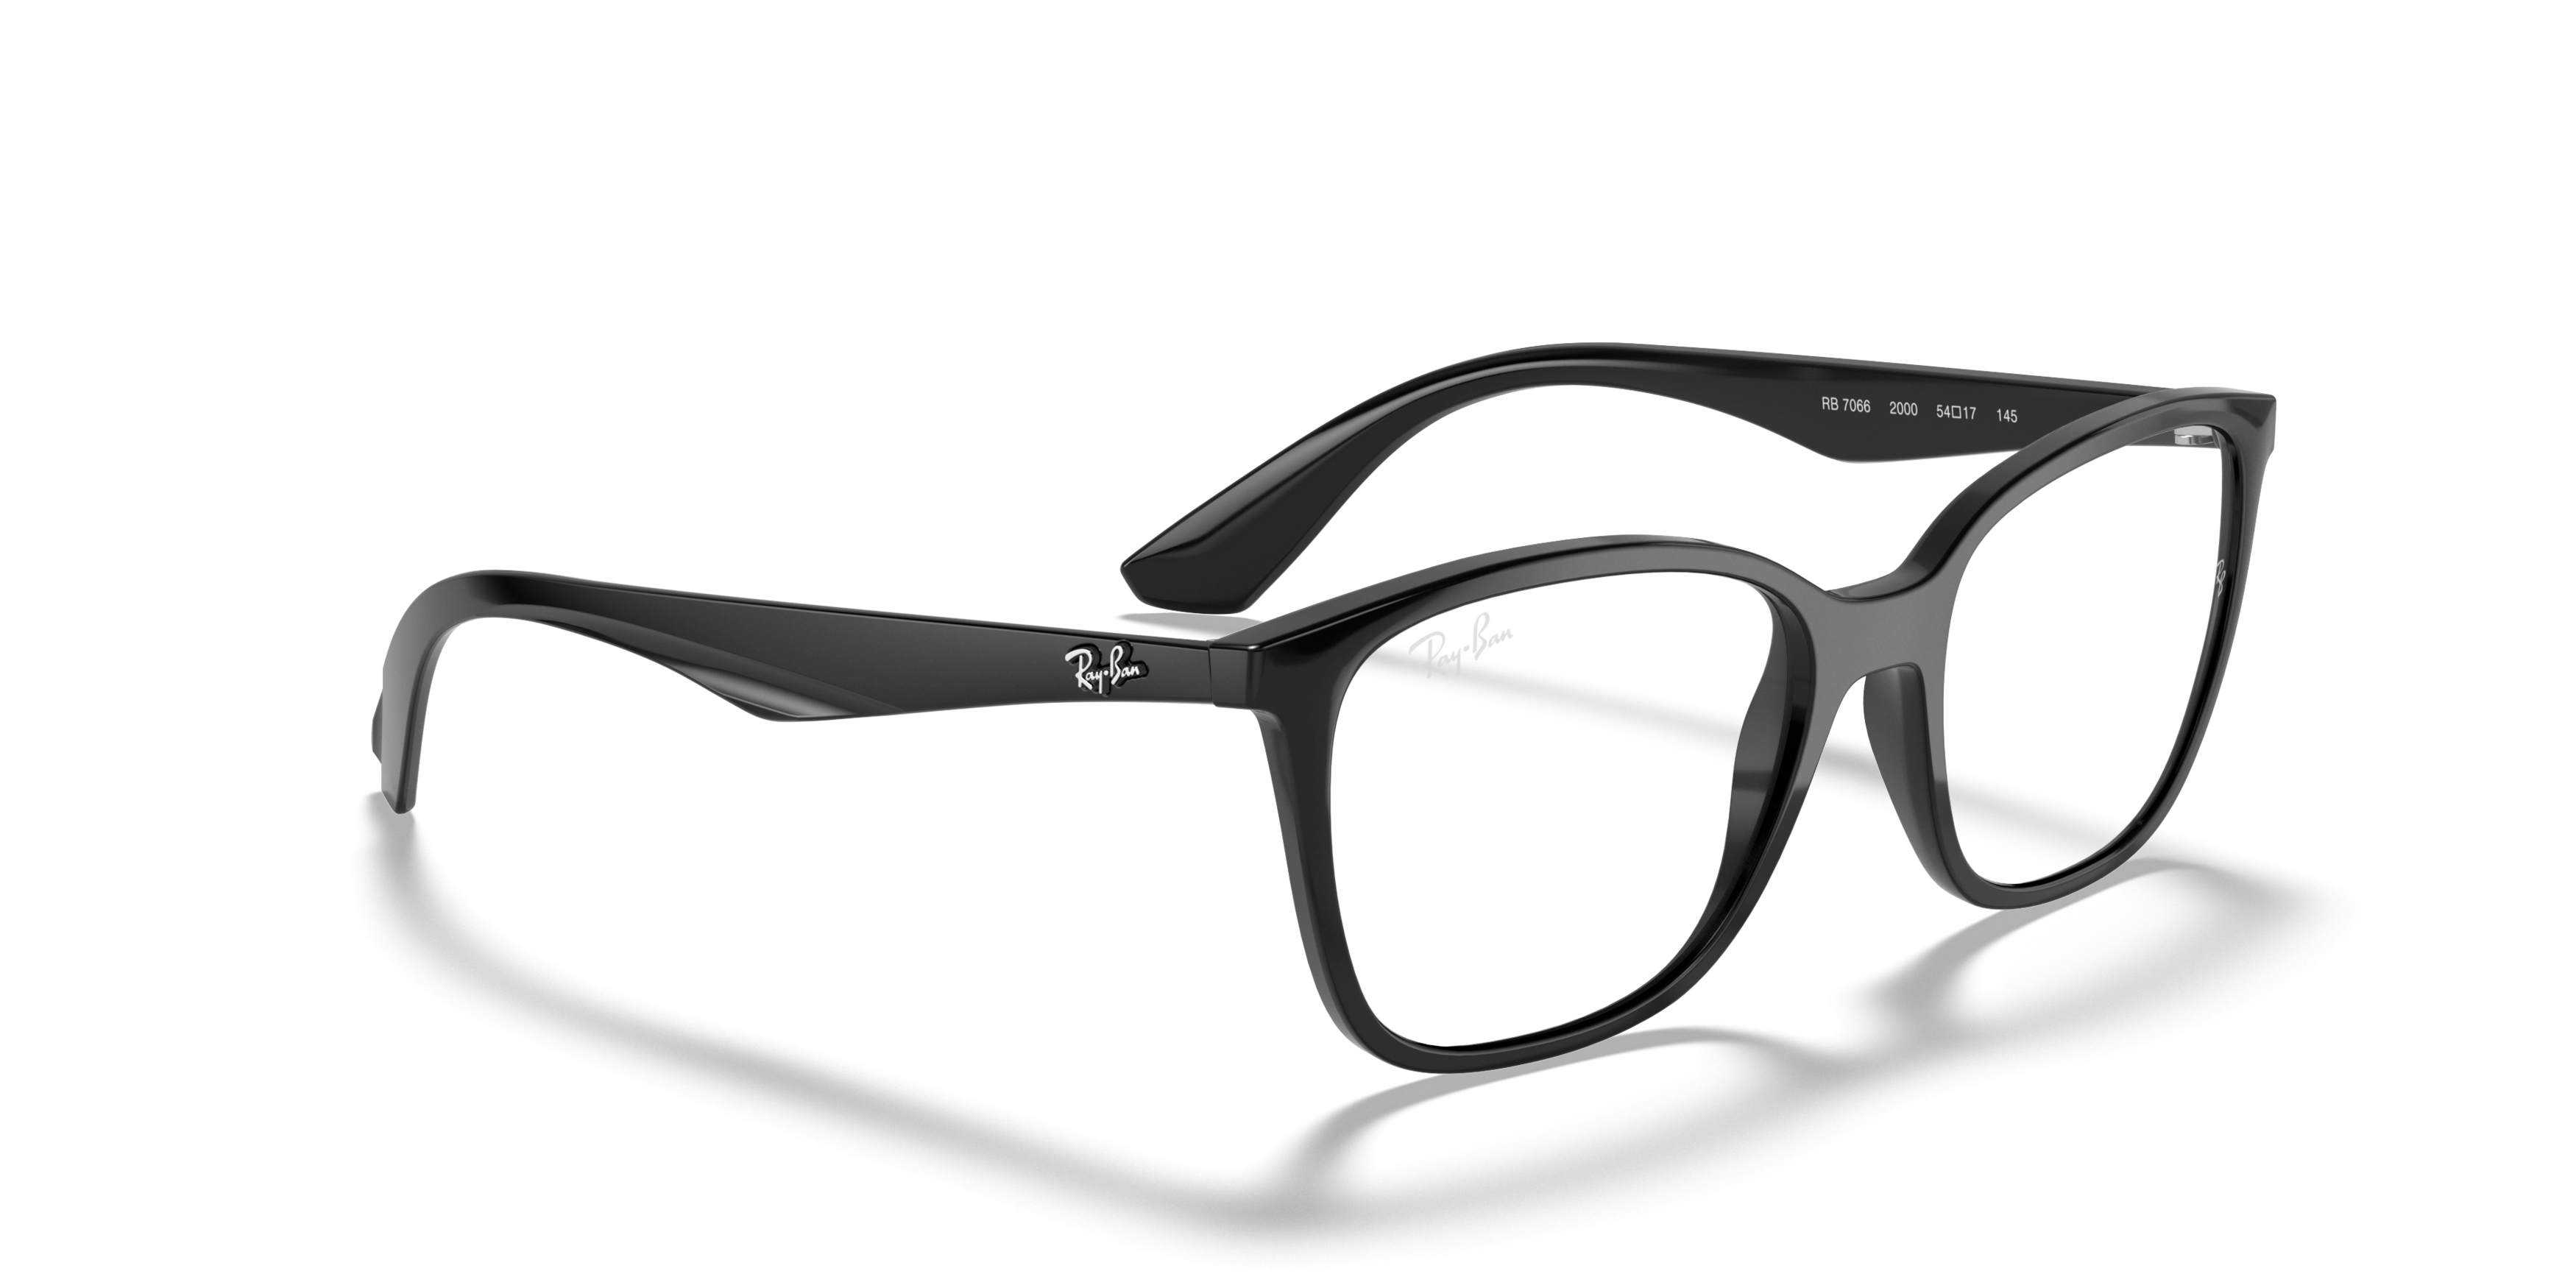 Angle_Right01 Ray-Ban RX 7066 (2000) Glasses Transparent / Black